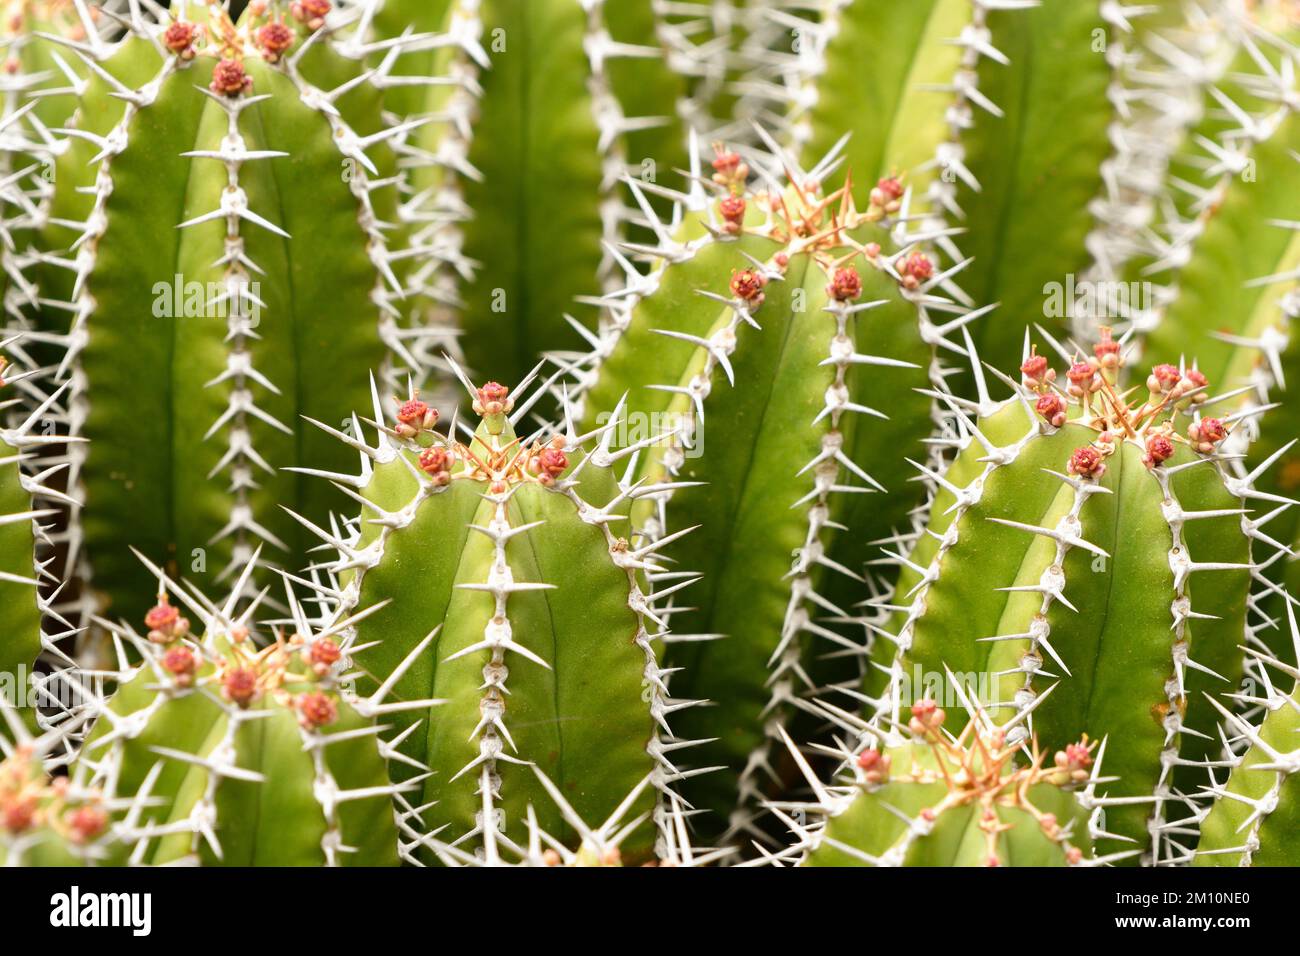 Close-up of a set of small green cacti with red flowers in their Stock Photo